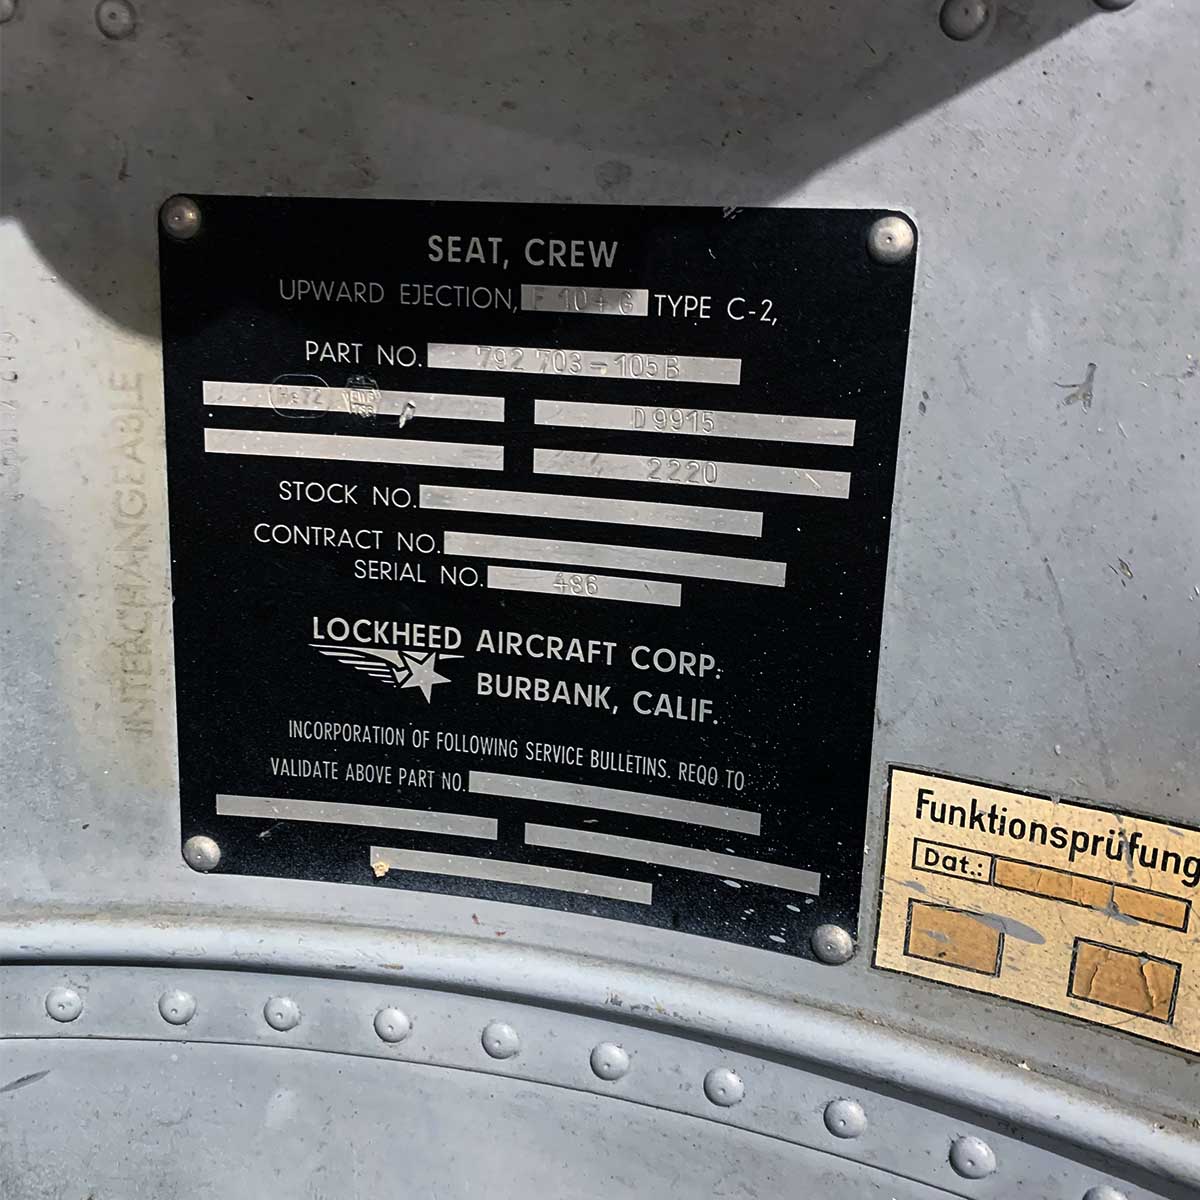 Construction number plate of a Lockheed C2 ejection seat.